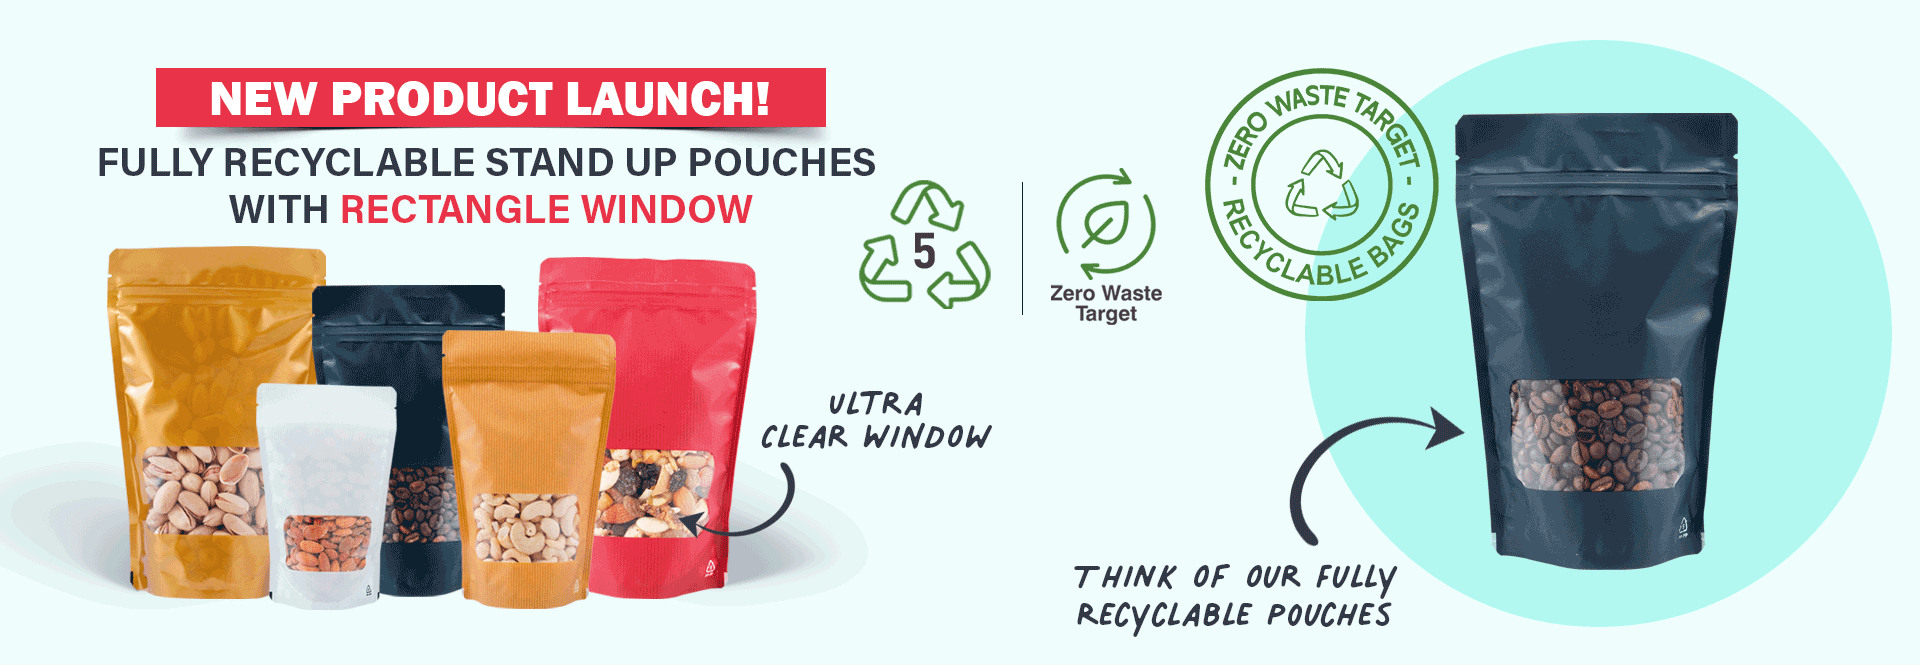 Recyclable Code 5 Pouches